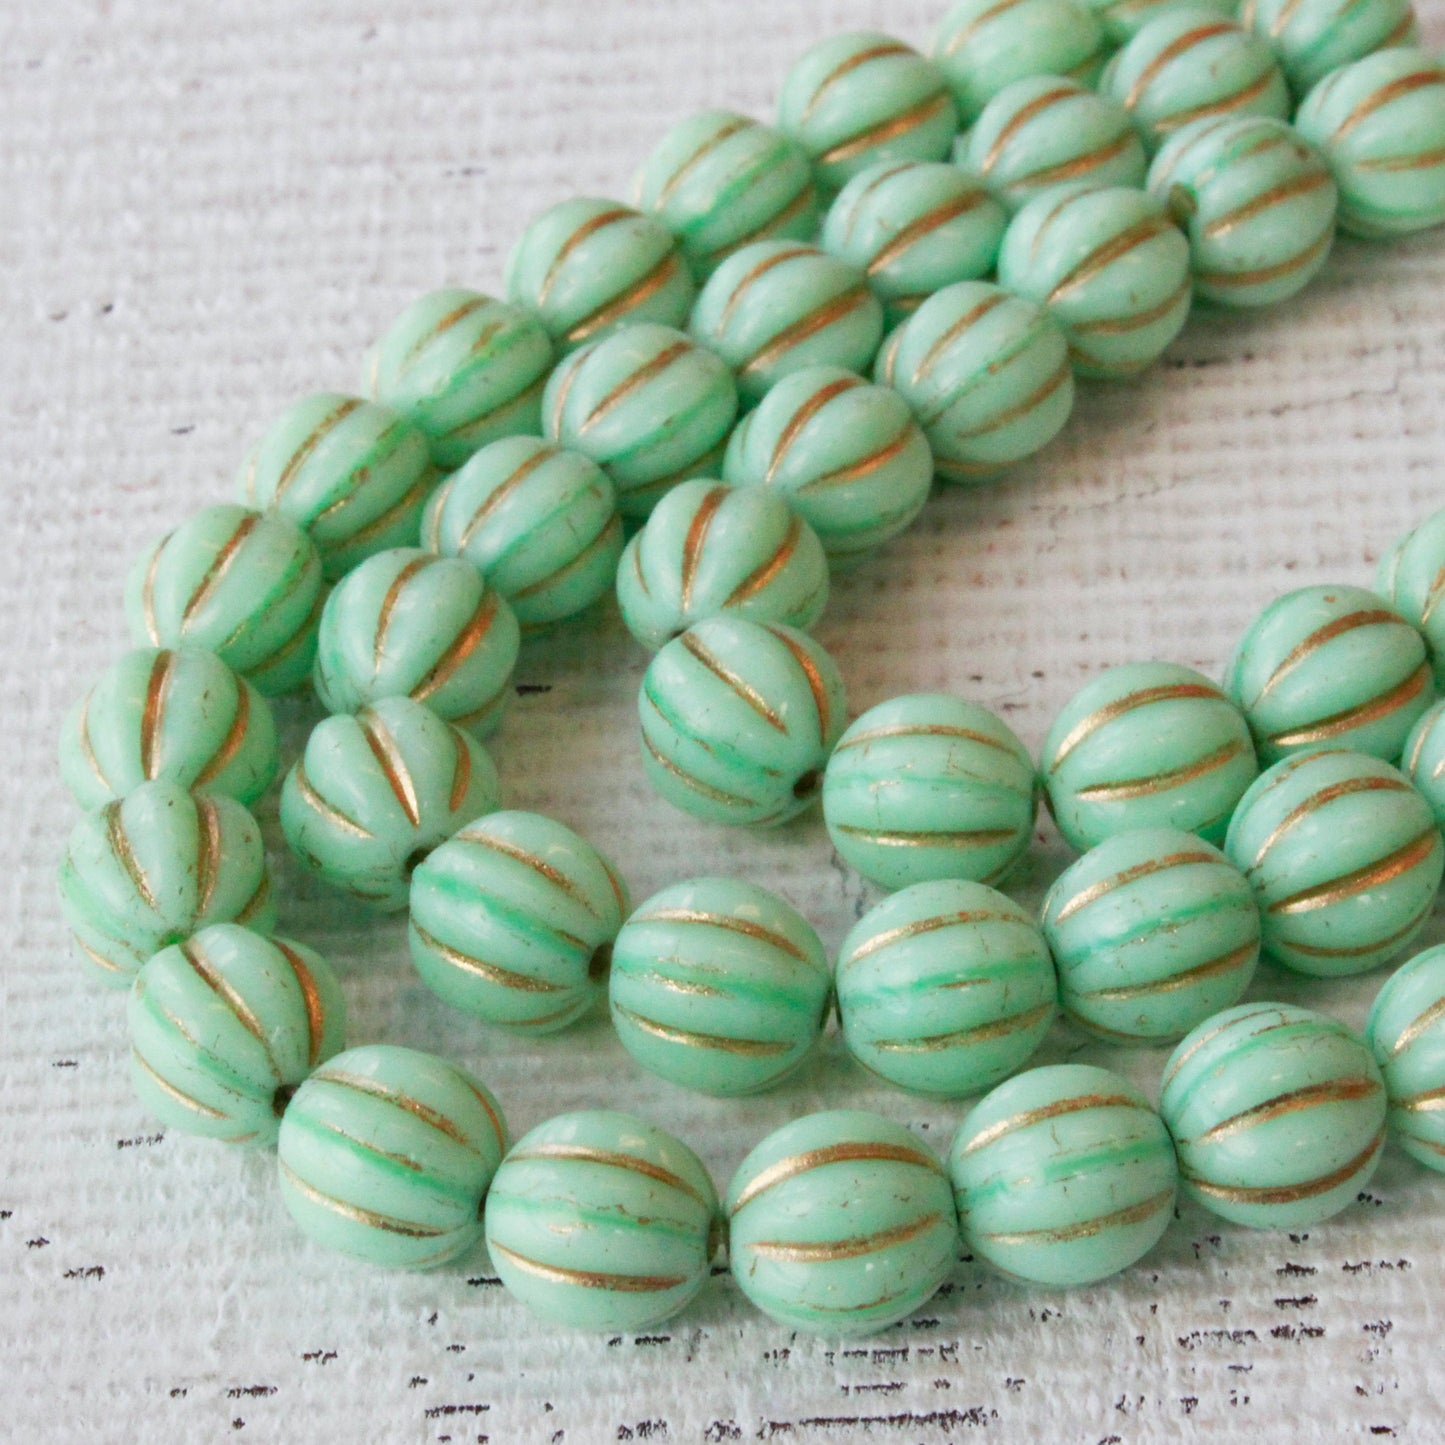 8mm Melon Beads - Green Mint with Gold Wash - 20 Beads